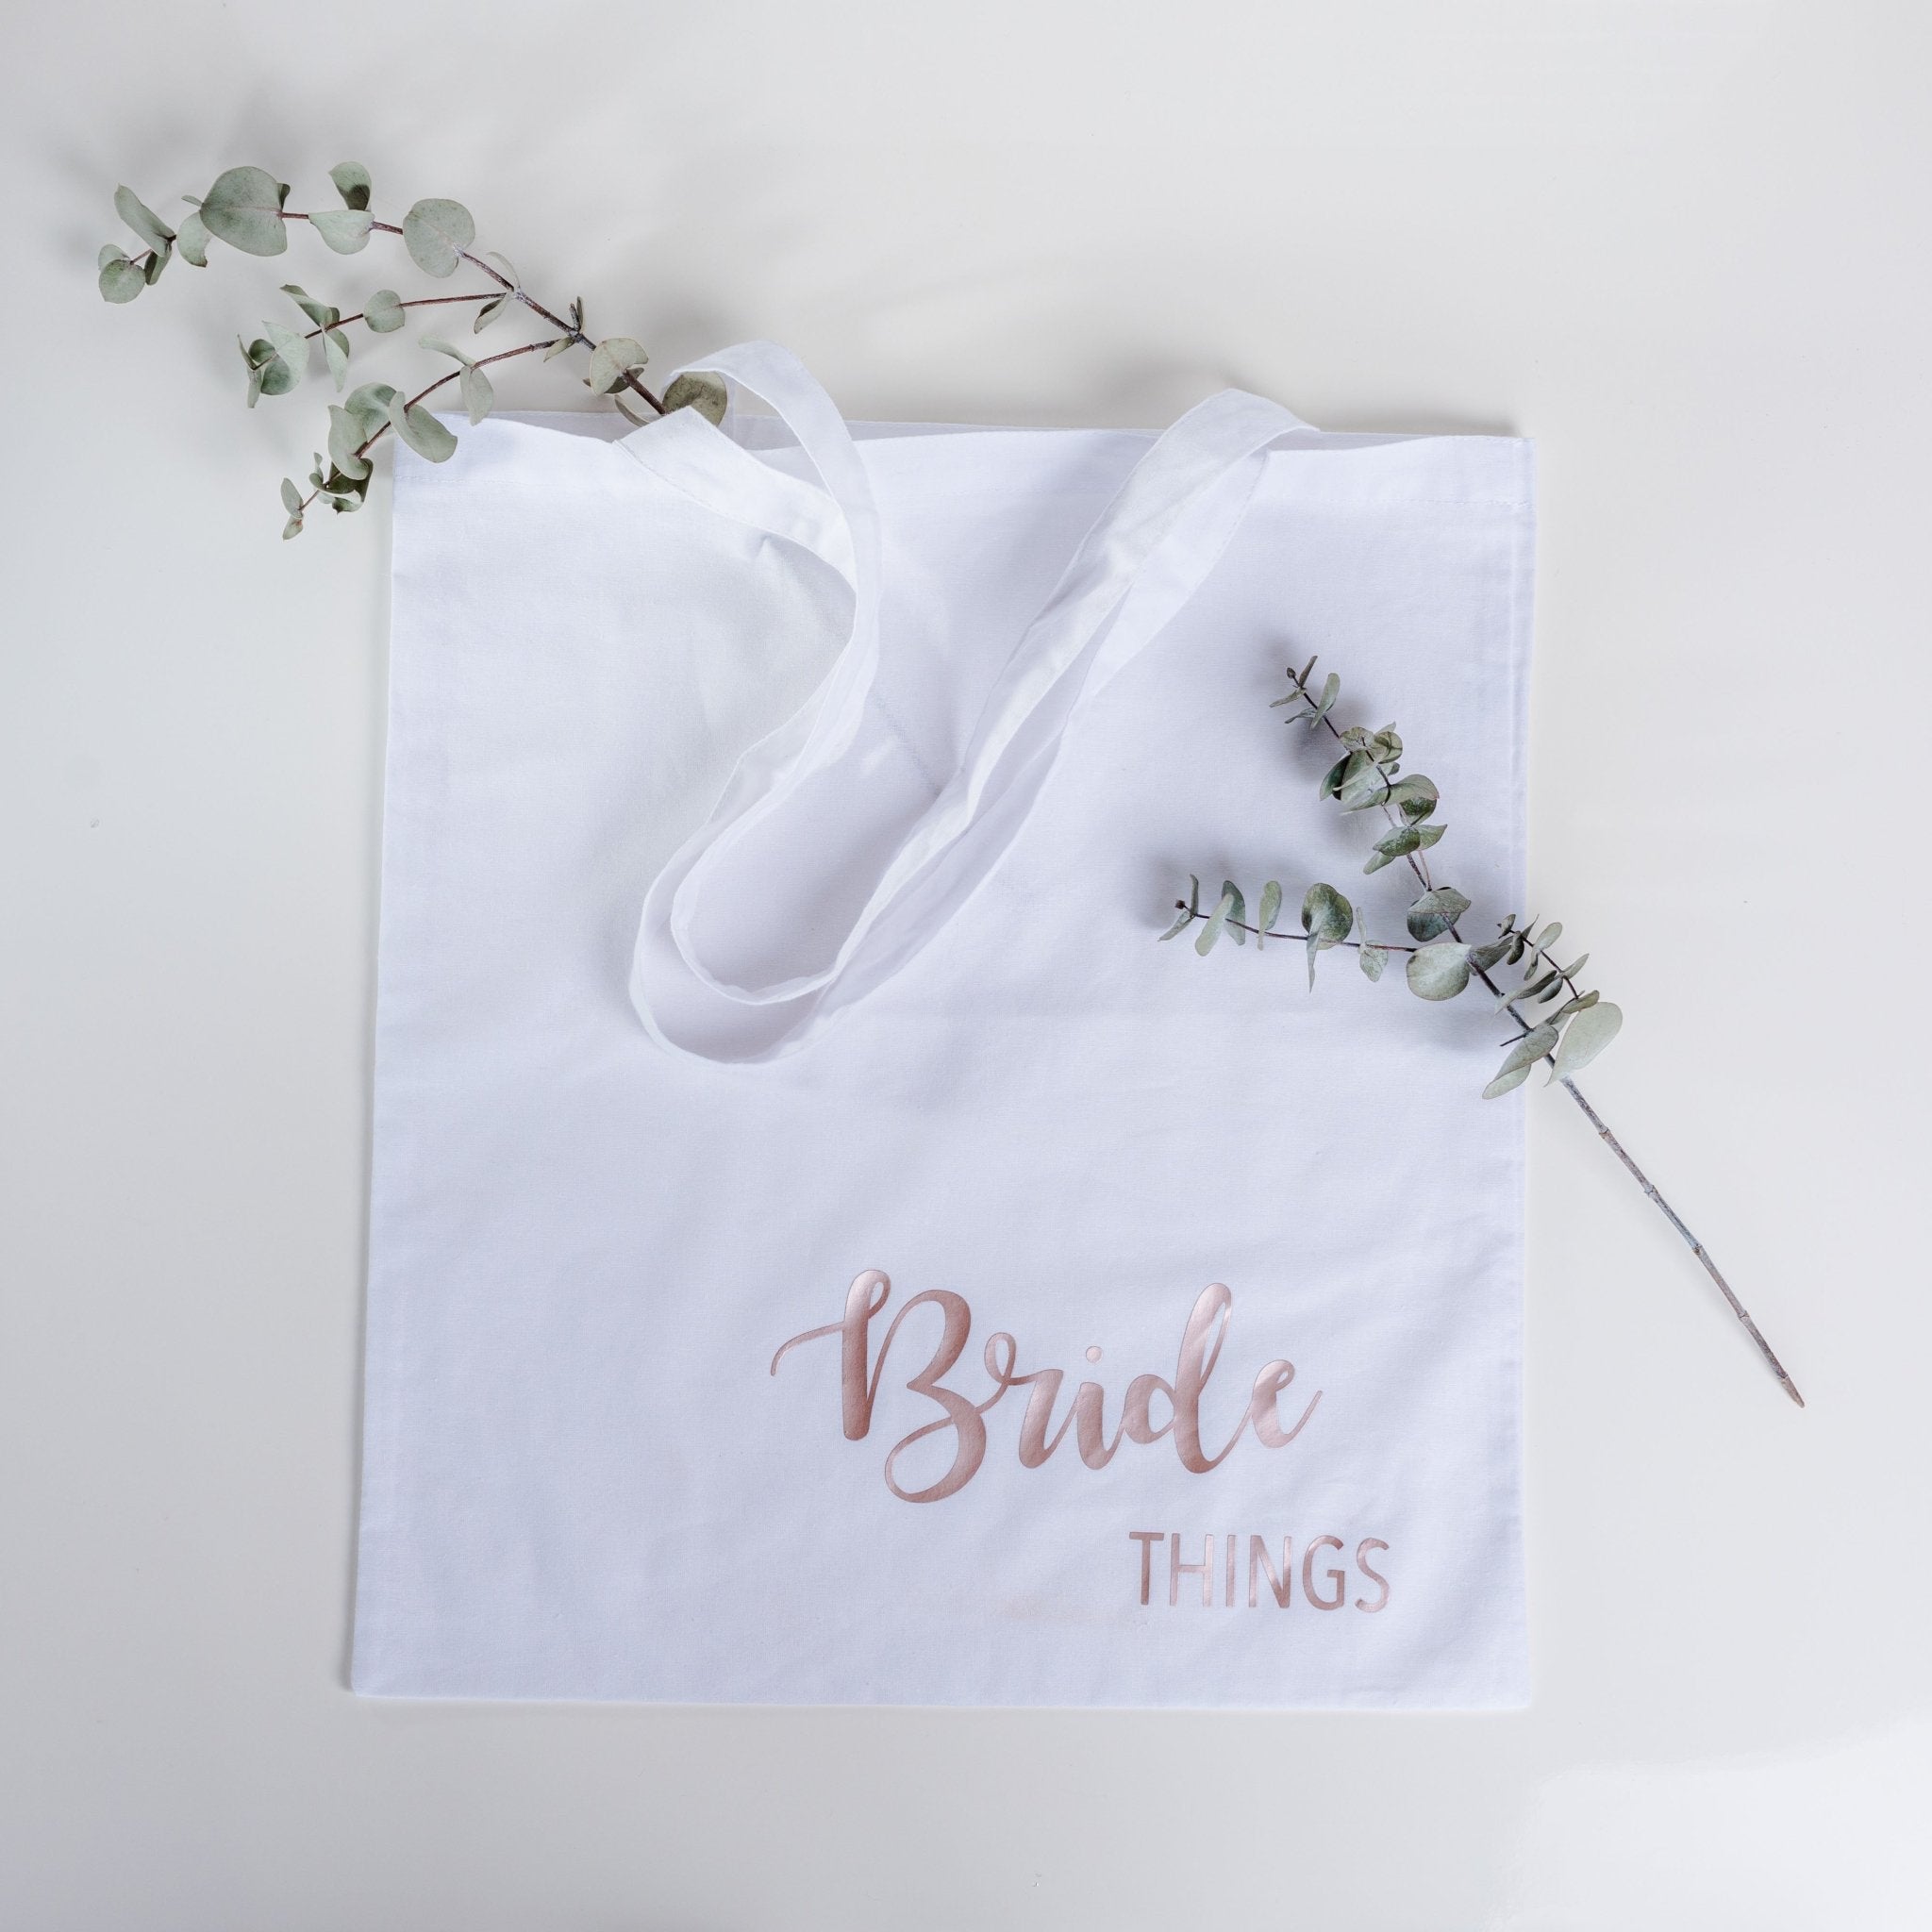 24 Bridesmaid Tote Bags Your BFFs Will Use All the Time